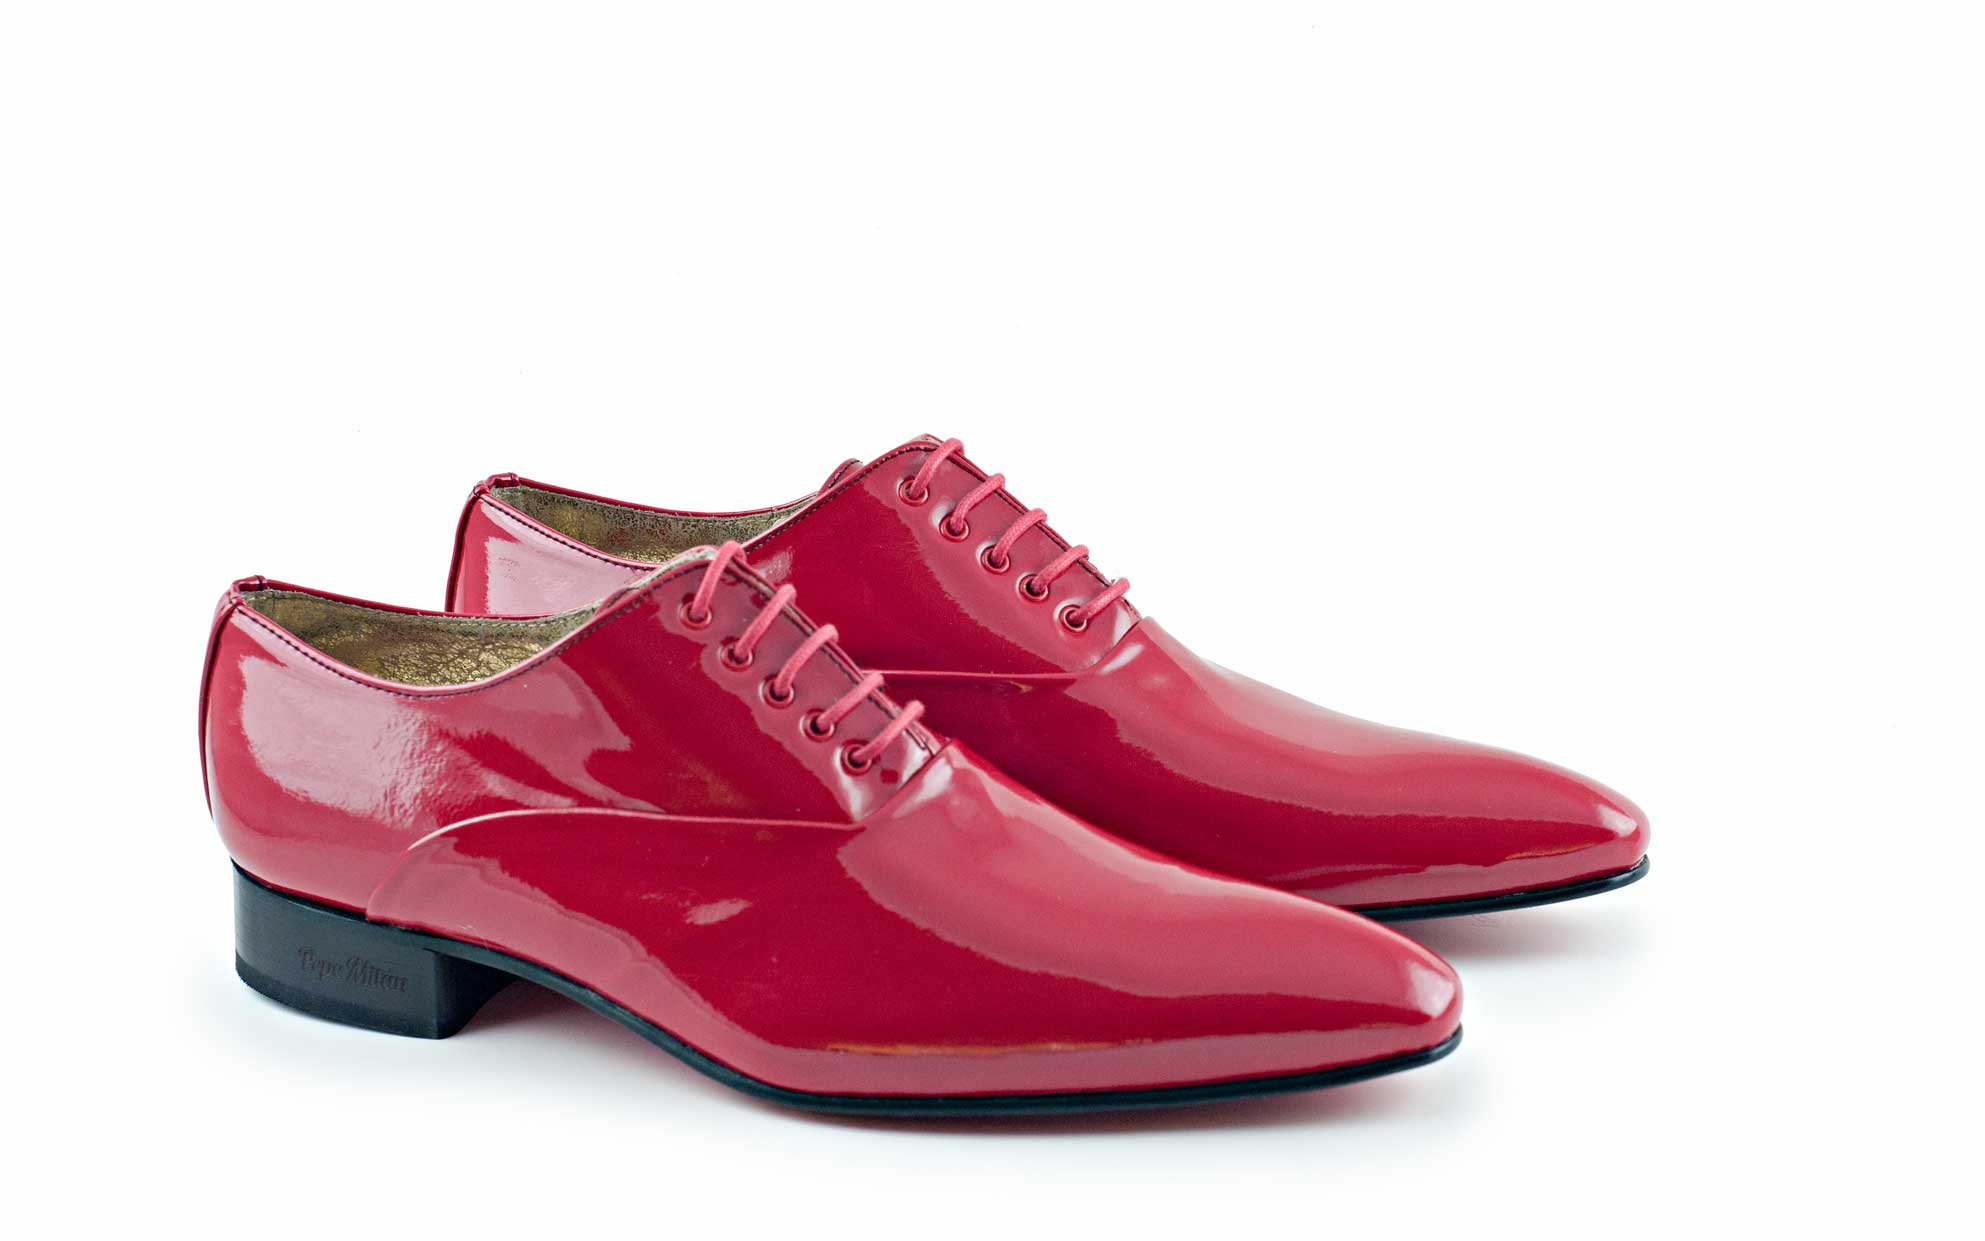 Cherry shoe, manufactured in red patent 